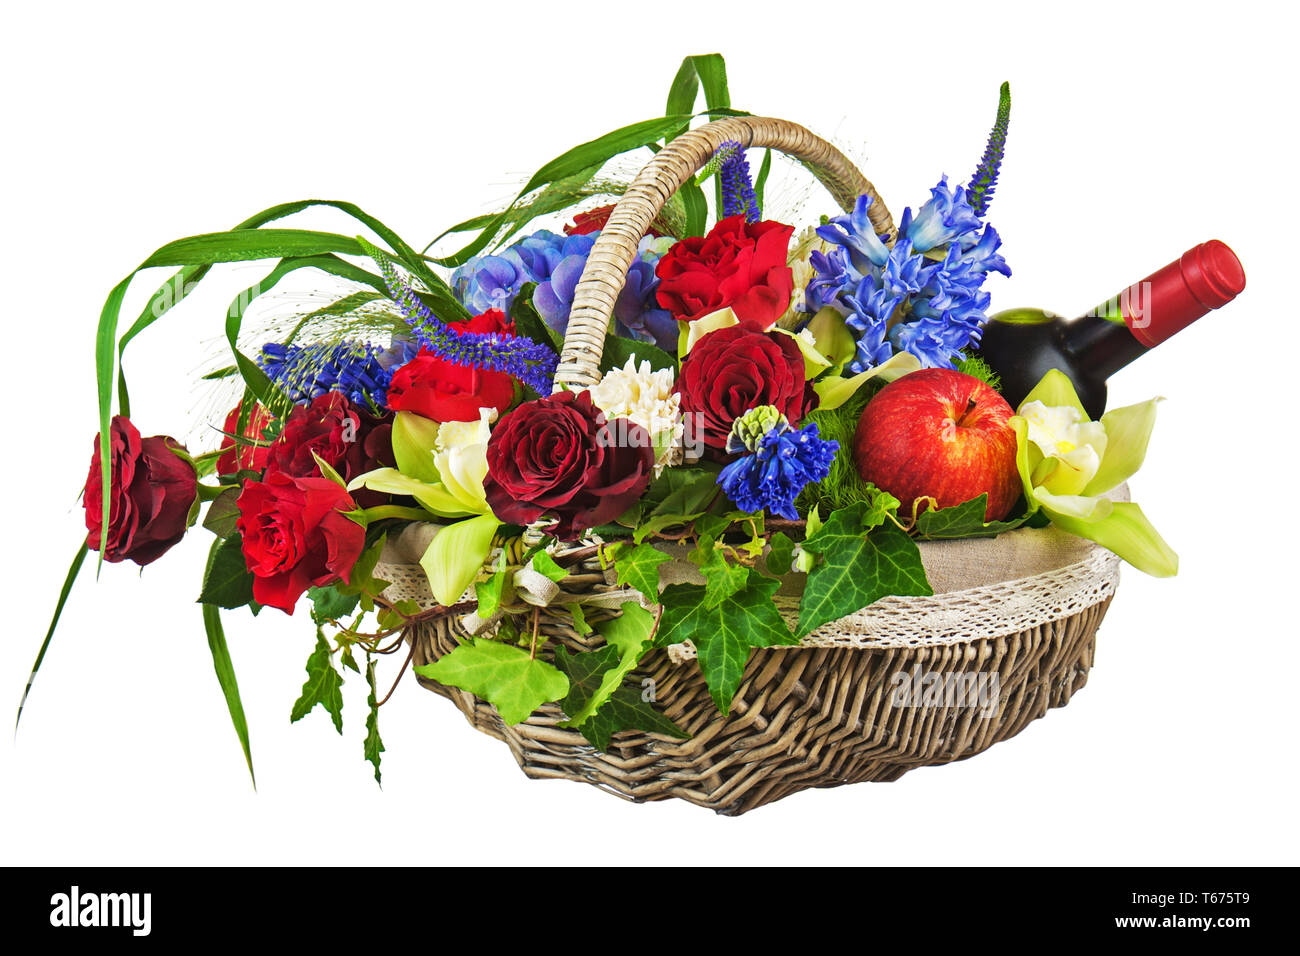 Flower arrangement of roses, orchids, fruits and b Stock Photo